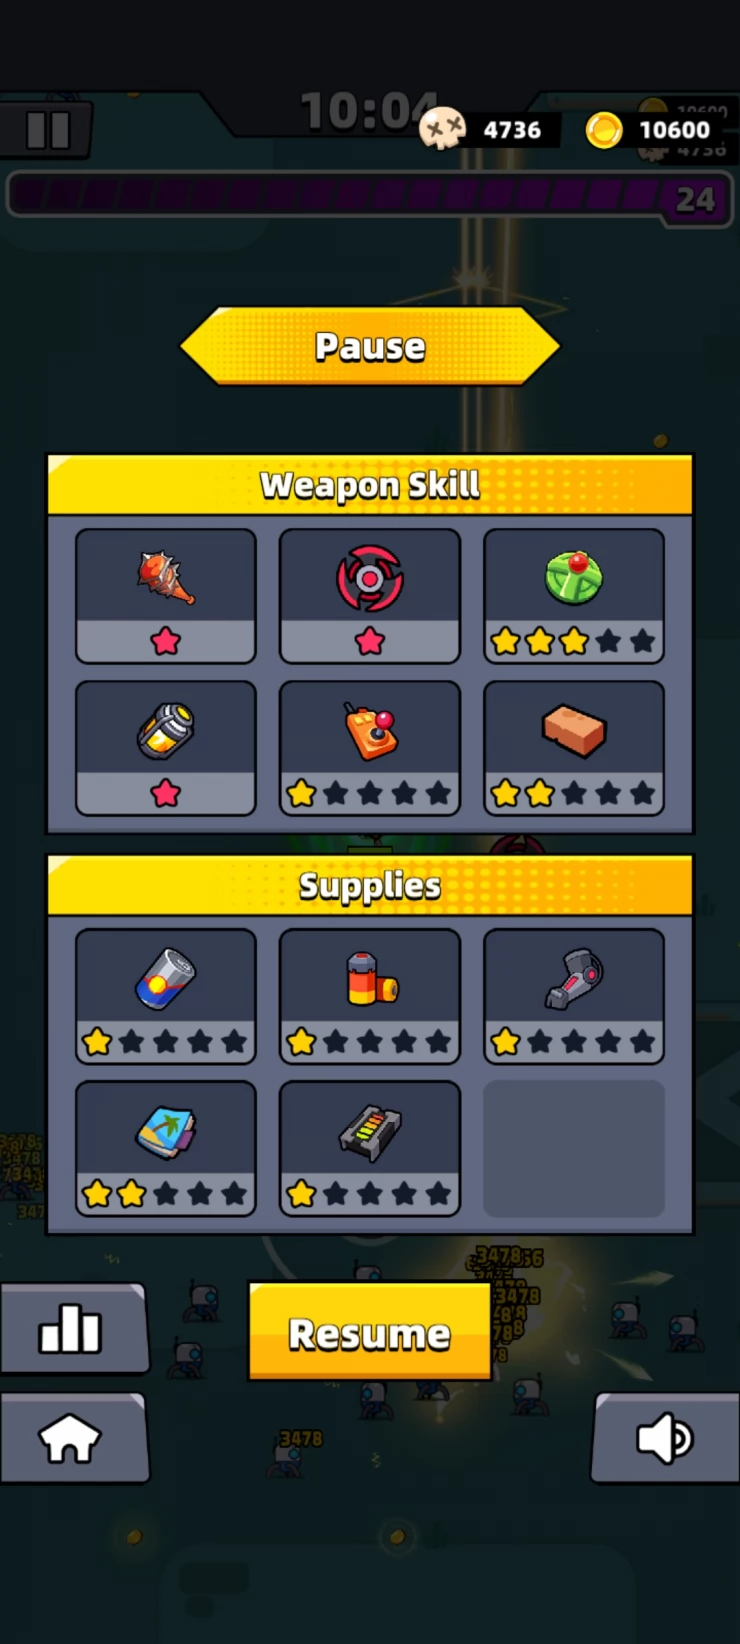 Boss 2 Loadout - Easily dispatched this boss